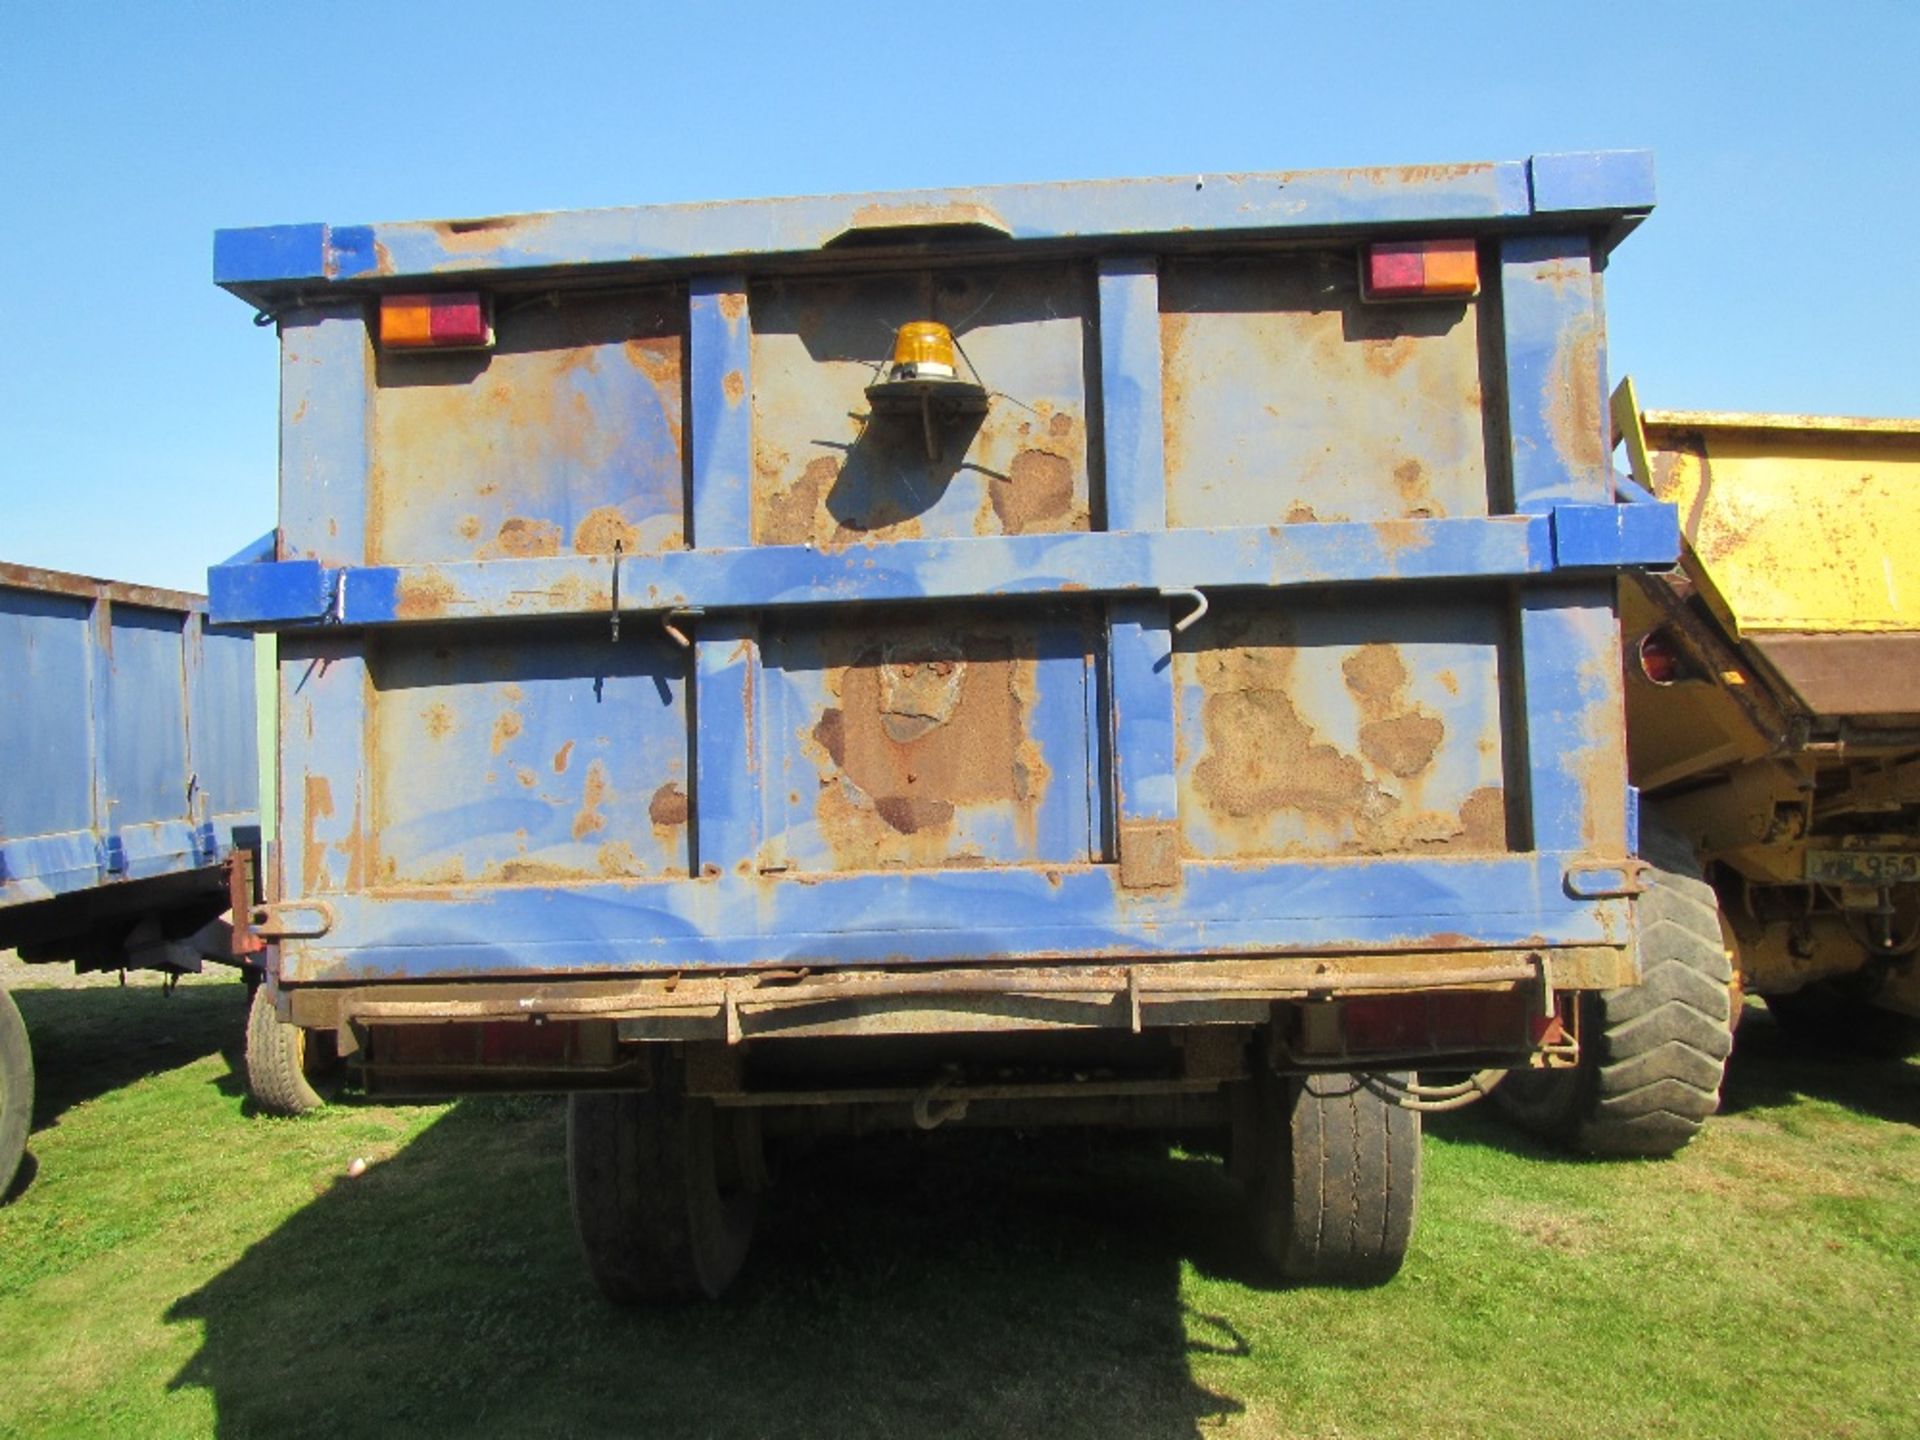 Larrington Tipping Trailer with Air Brakes, Suspension & Hydraulic Door - Image 3 of 7